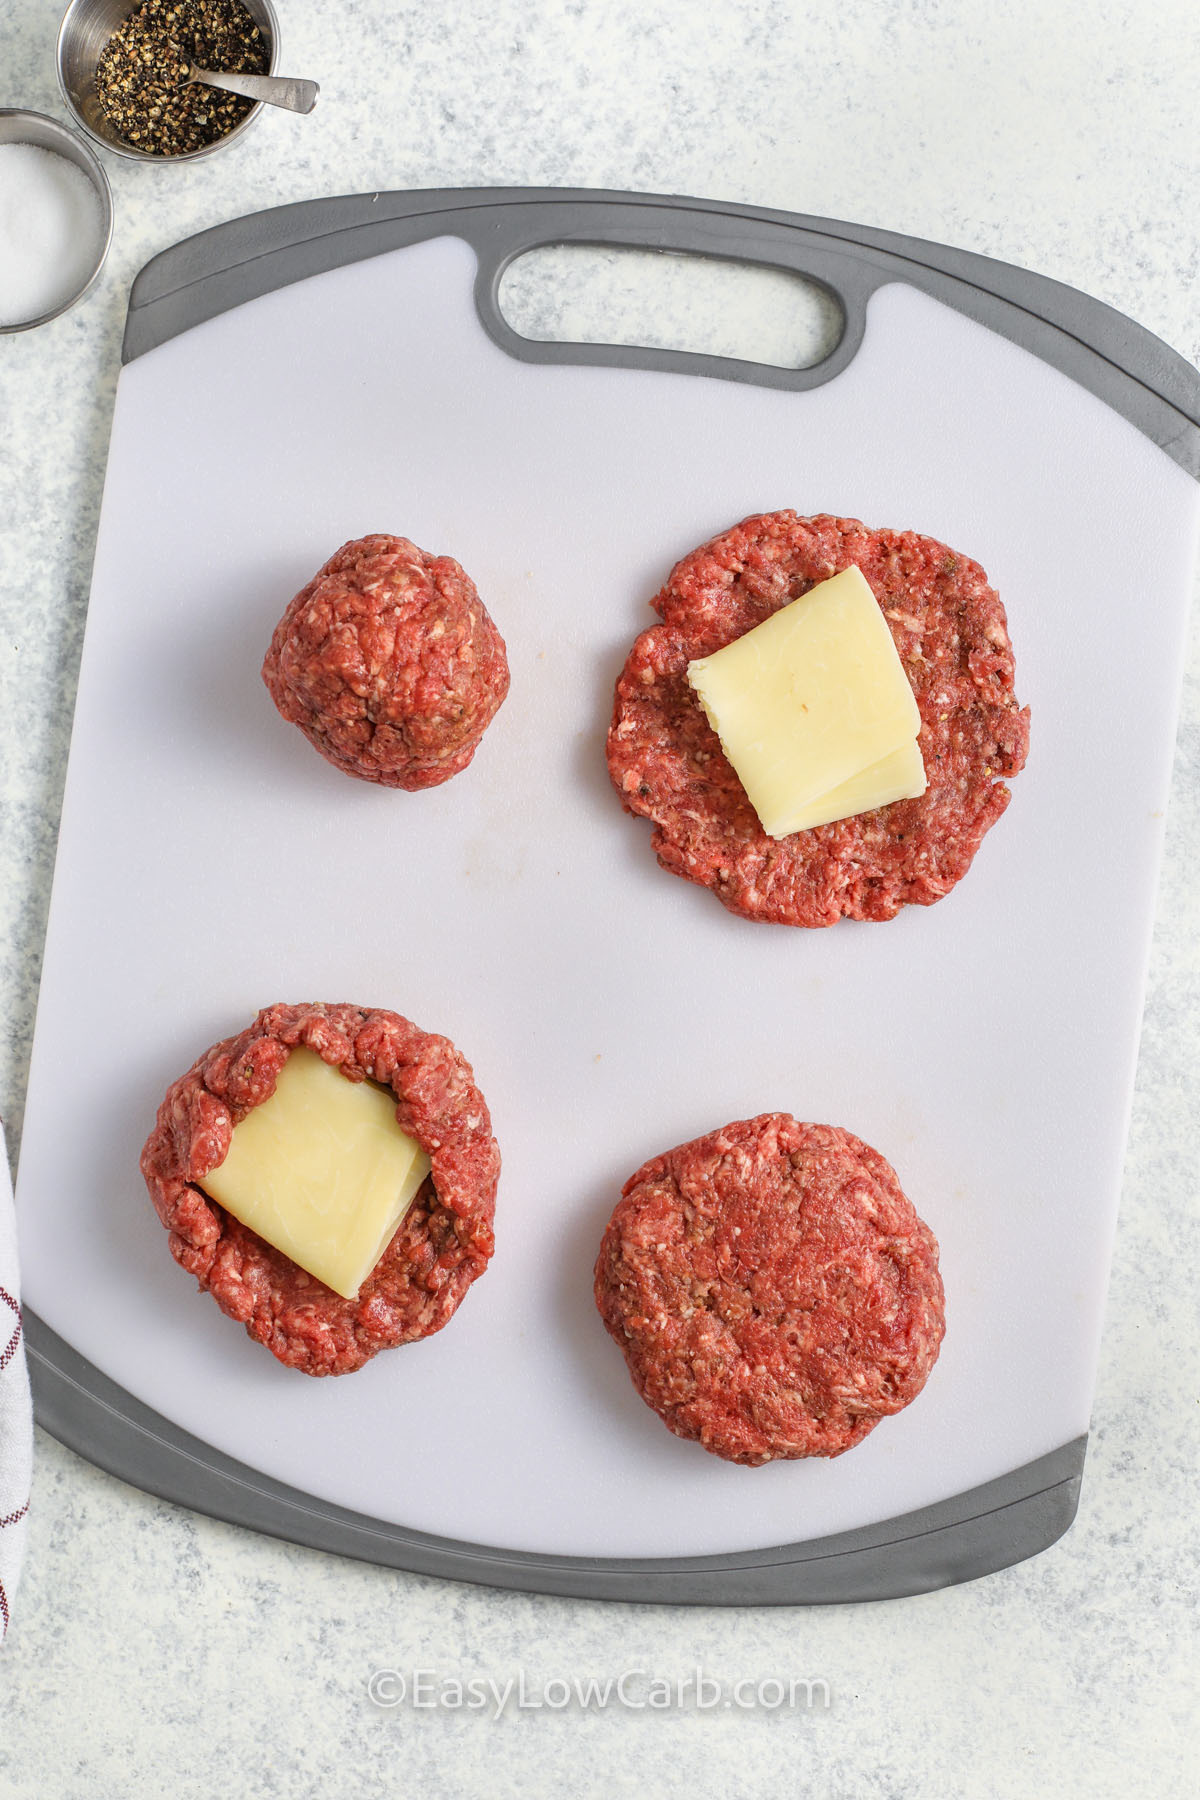 adding cheese to beef to make Stuffed Burgers